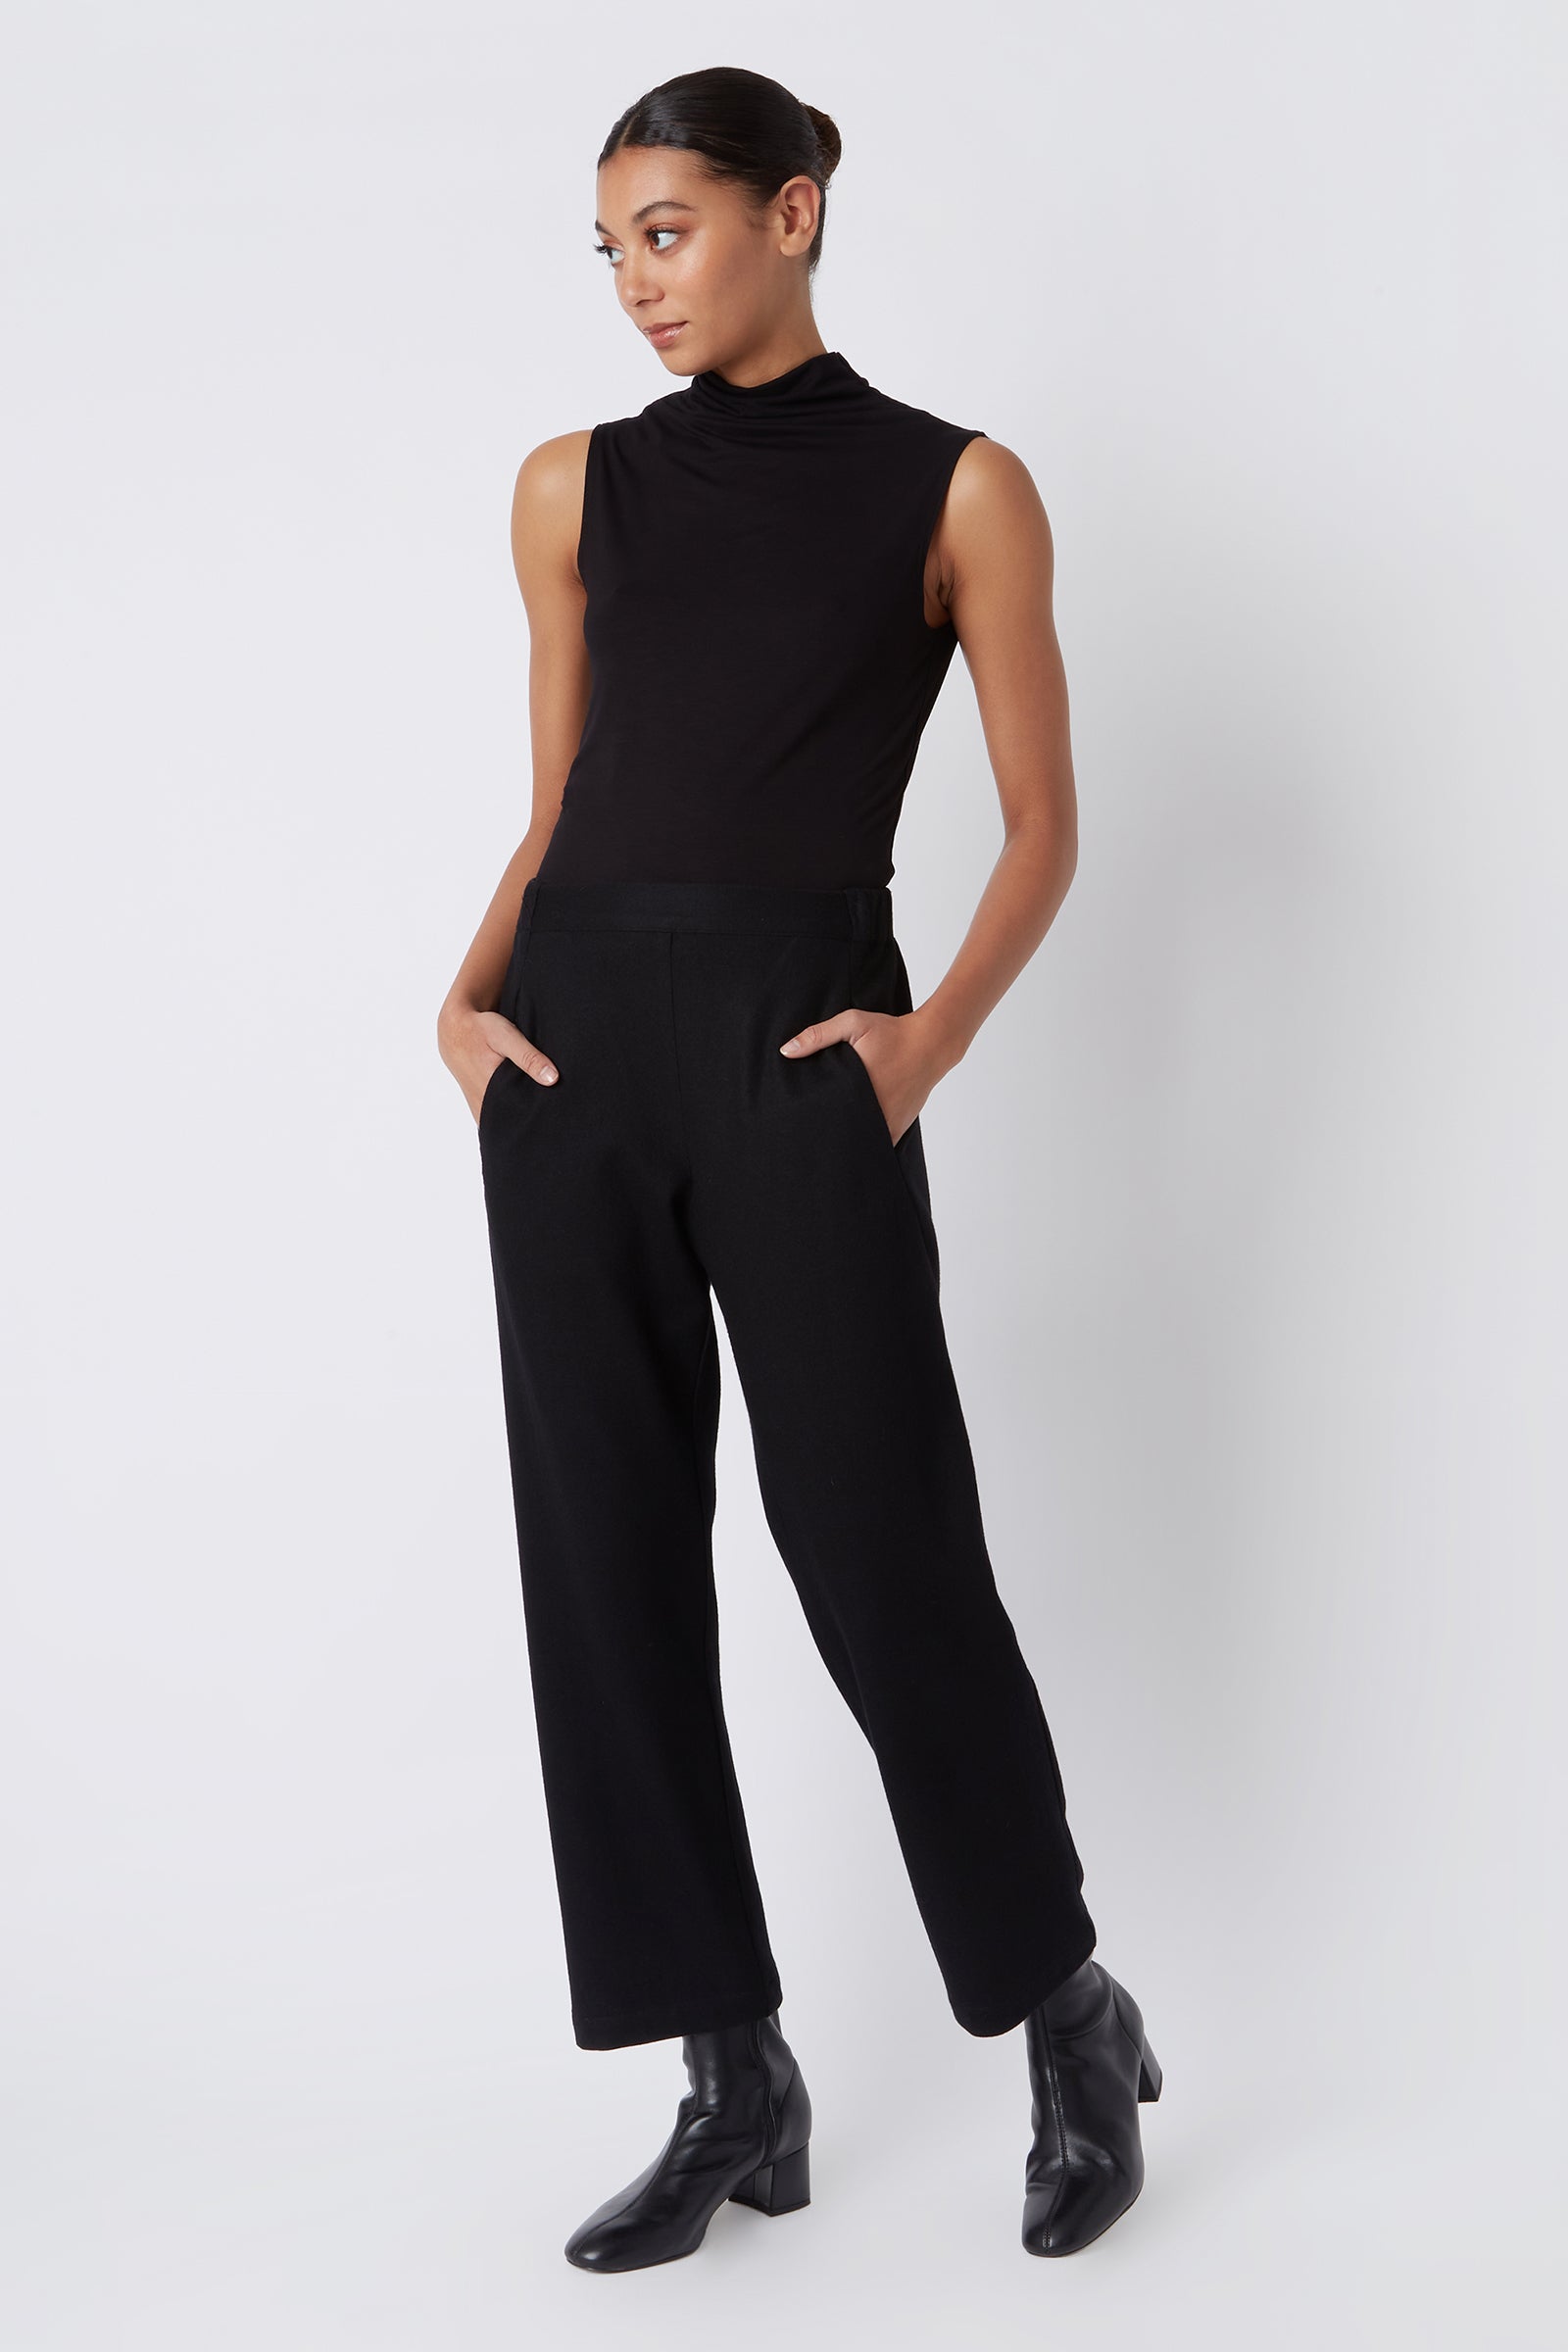 Kal Rieman Felted Jersey Angle Seam Crop Pant in Black Felted Jersey on Model Looking Right Full Front View